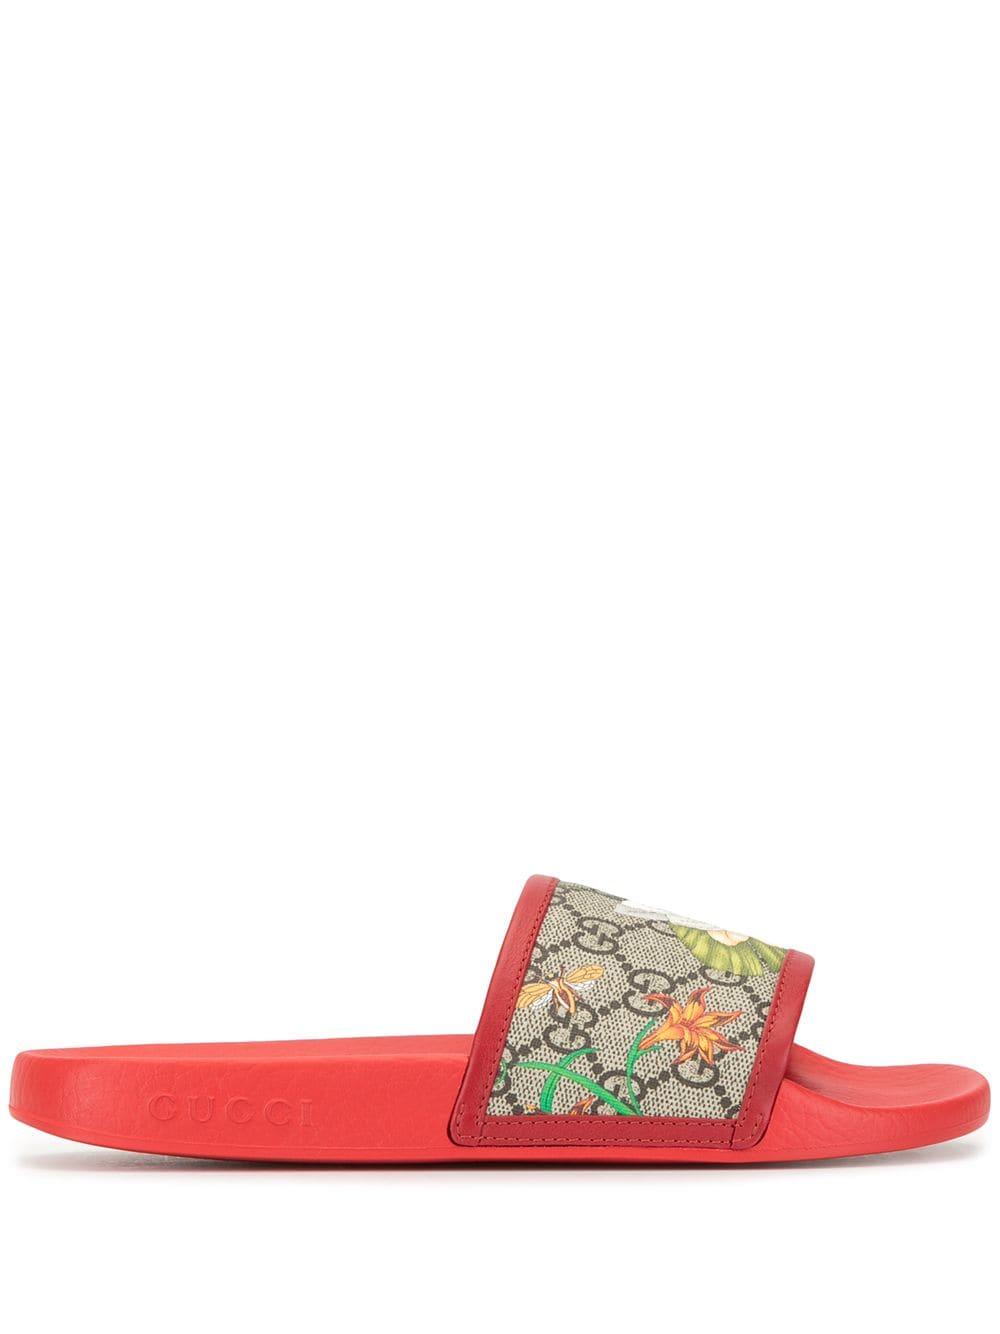 Gucci GG Flora Print Slides in Red | Lyst